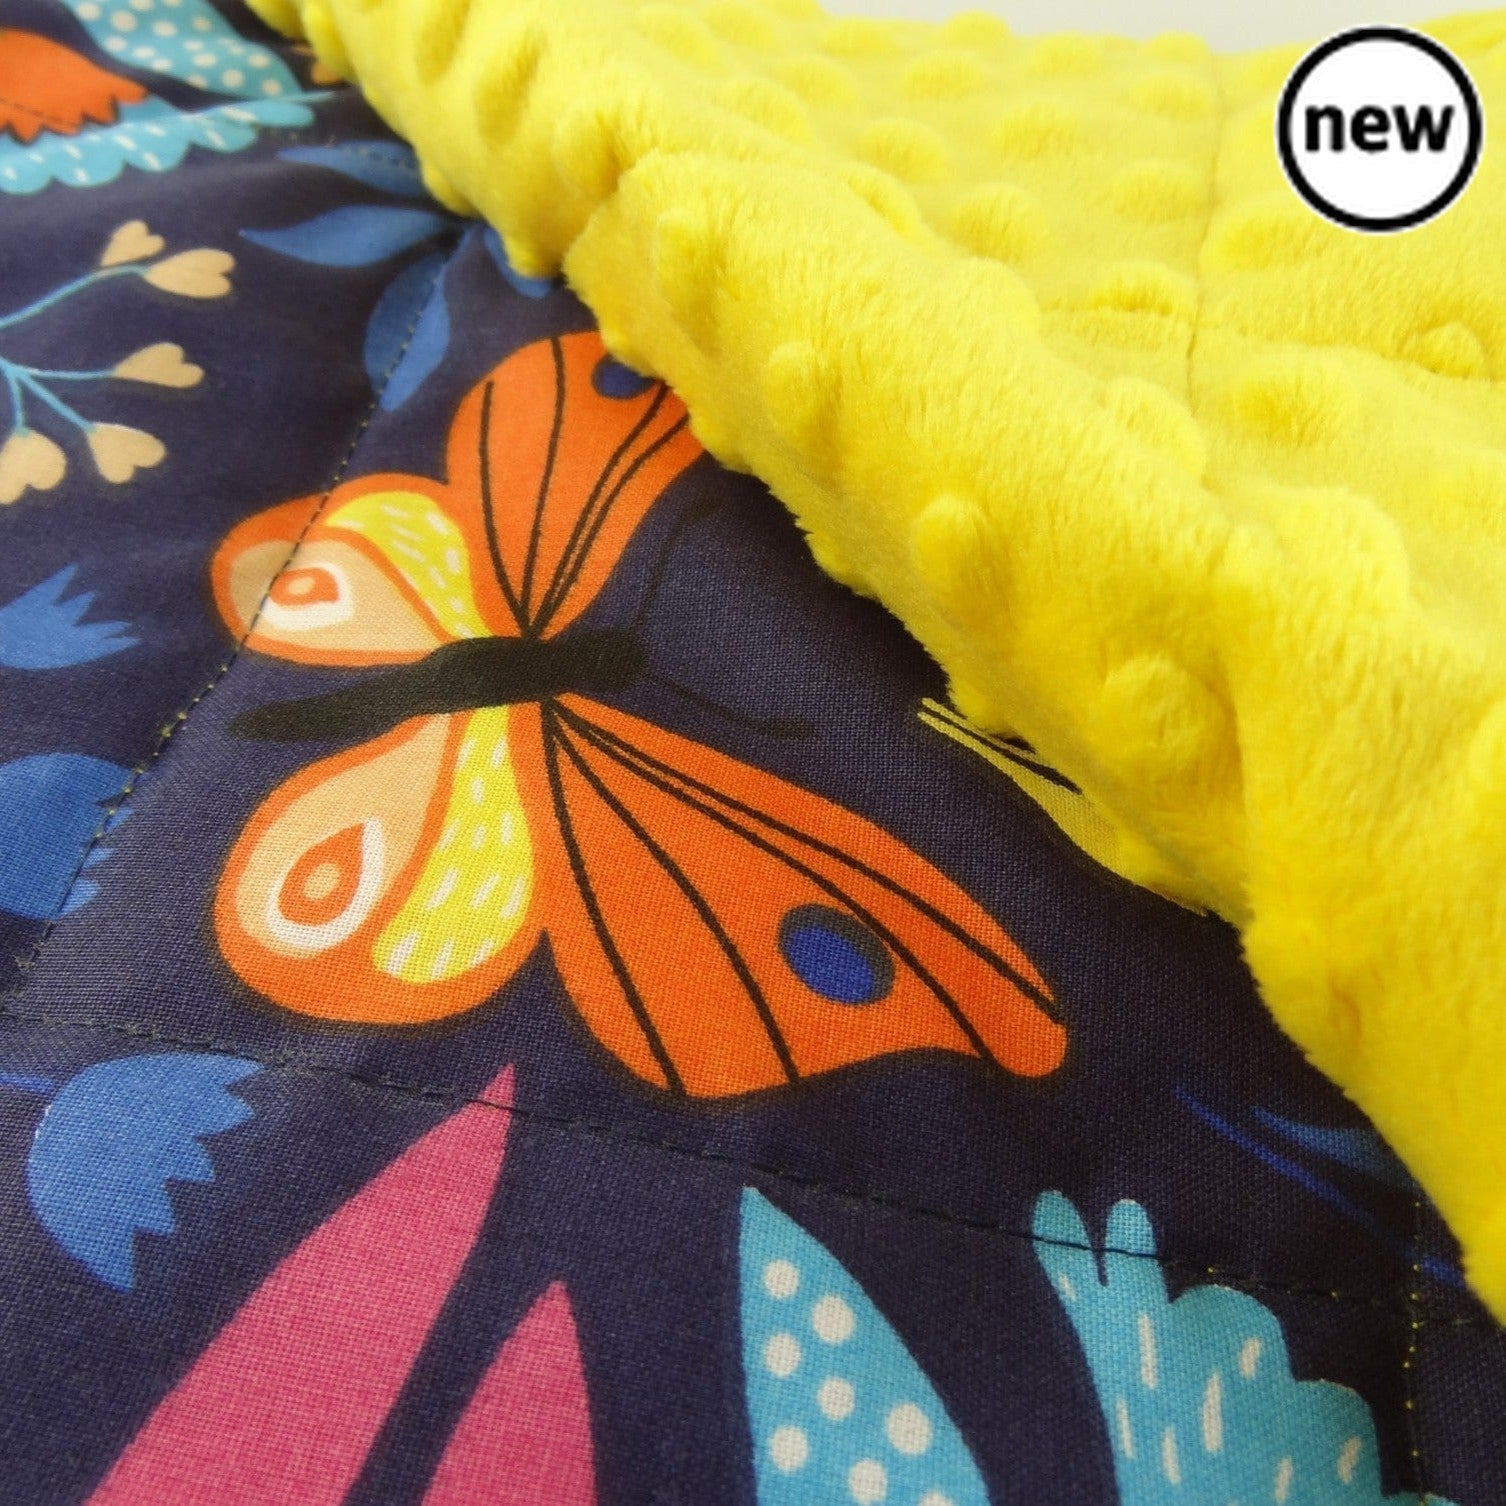 Summer Meadow Cotton Weighted Blanket, Introducing our Summer Meadow Cotton Weighted Blanket – a tranquil blend of comfort and nature, handcrafted to your individual specifications. Entirely handmade from start to finish, this 100% cotton weighted blanket features a serene summer meadow design, offering a personalized touch suitable for all age groups. Key Features: Handmade Excellence: Immerse yourself in the beauty of a summer meadow with our entirely handmade weighted blanket. Customize every detail, fro